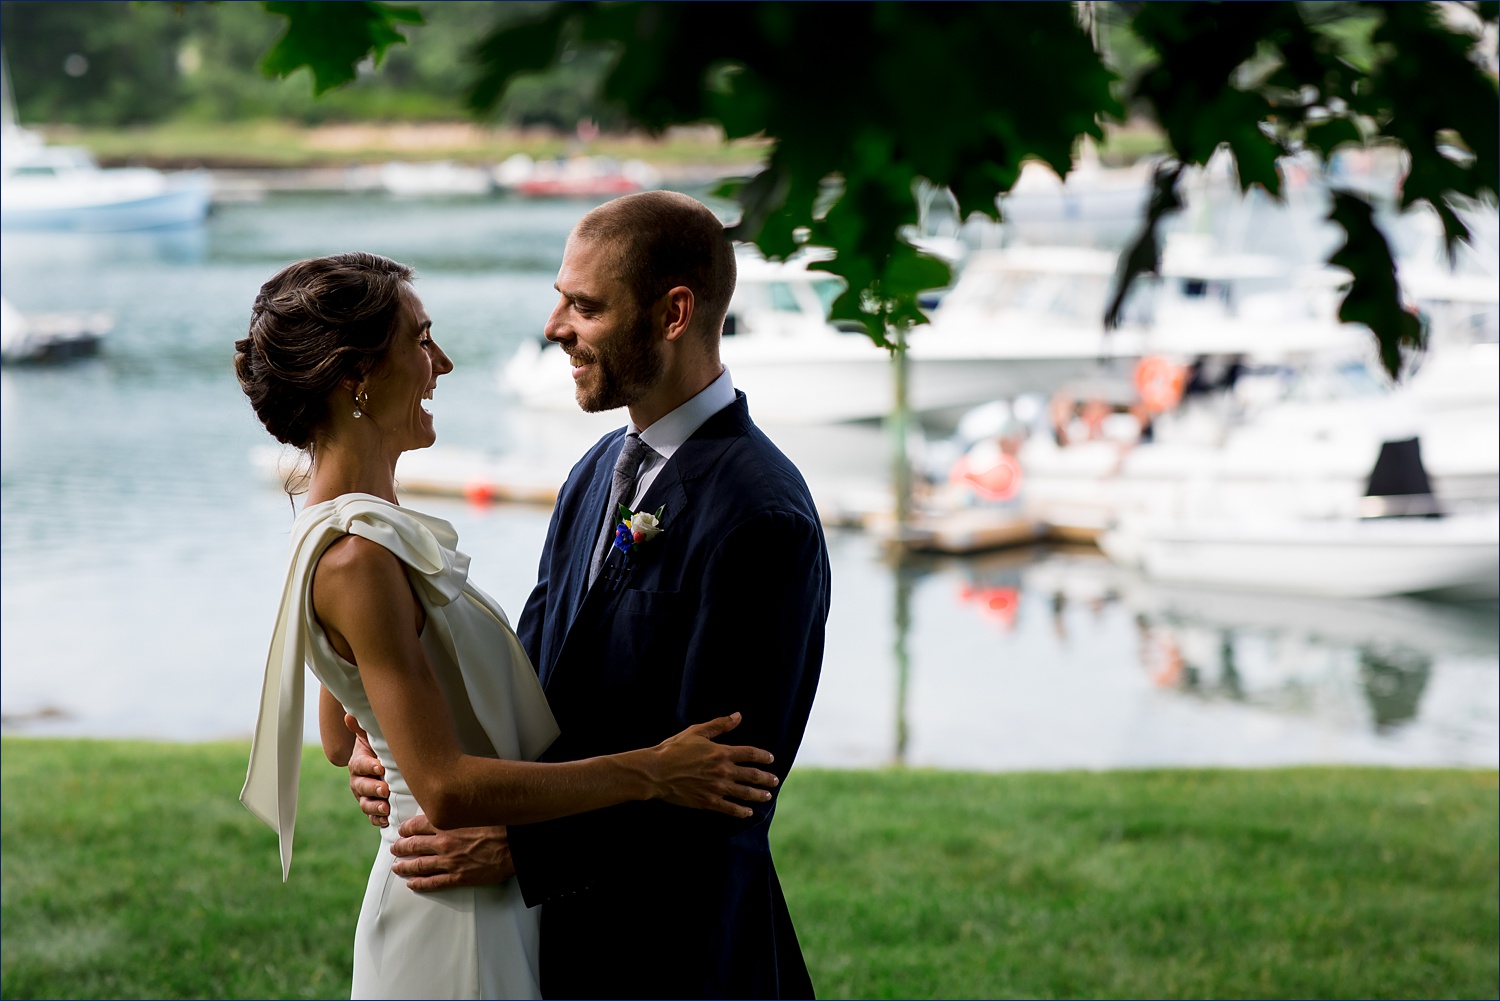 The bride and groom are ready to celebrate their wedding day at Dockside Guest Quarters in Maine